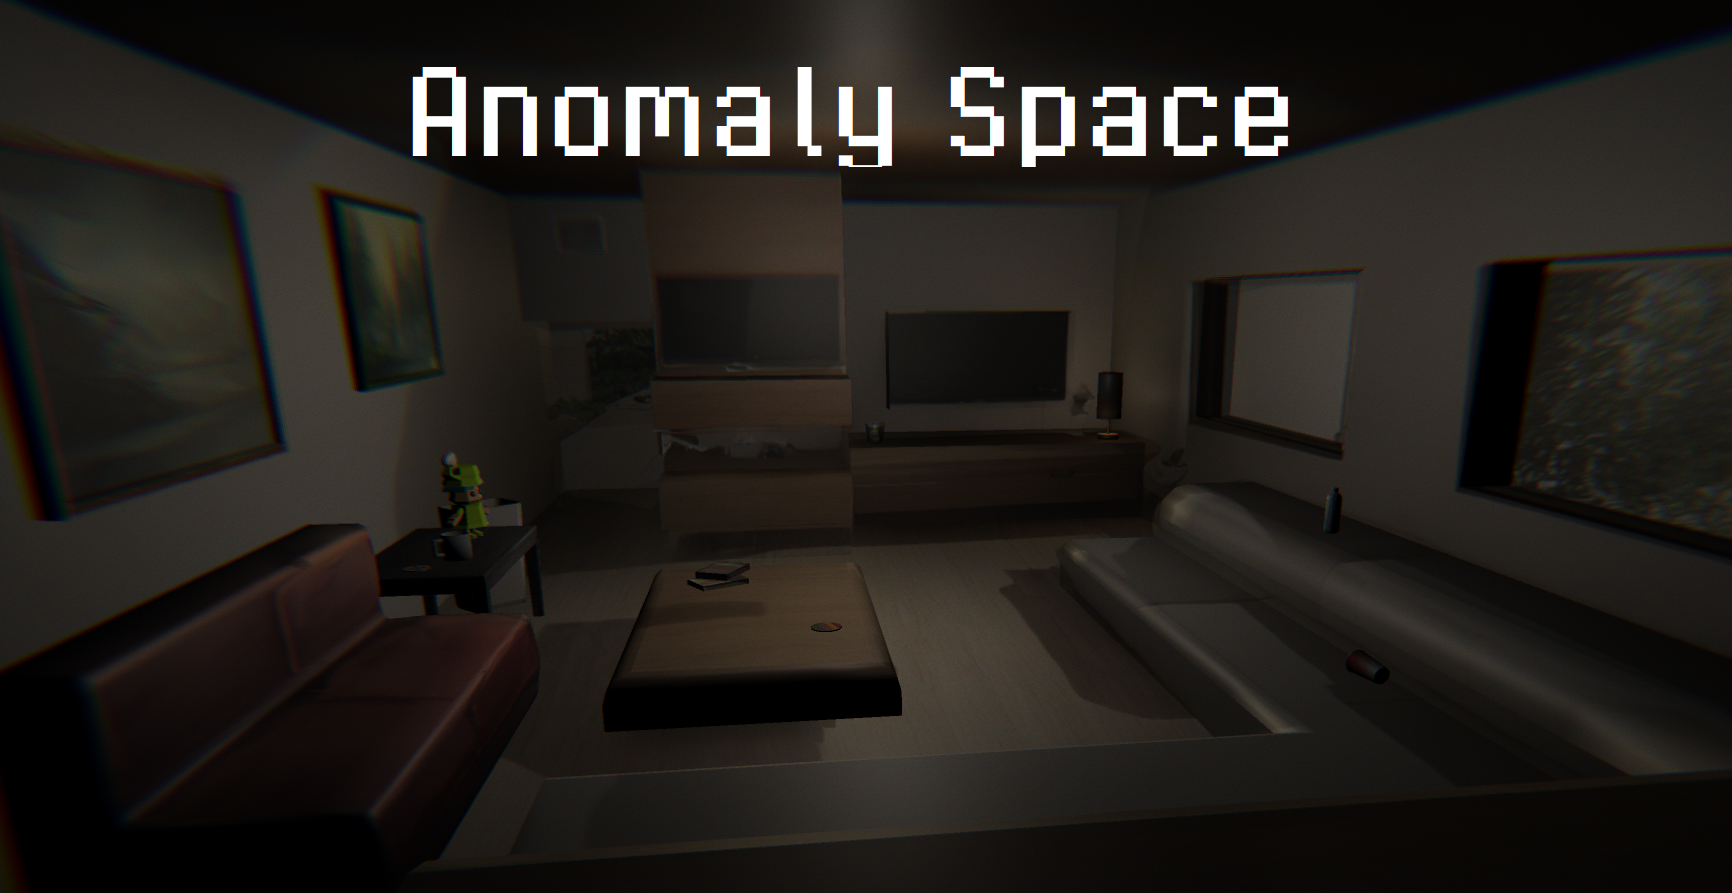 Anomaly Space